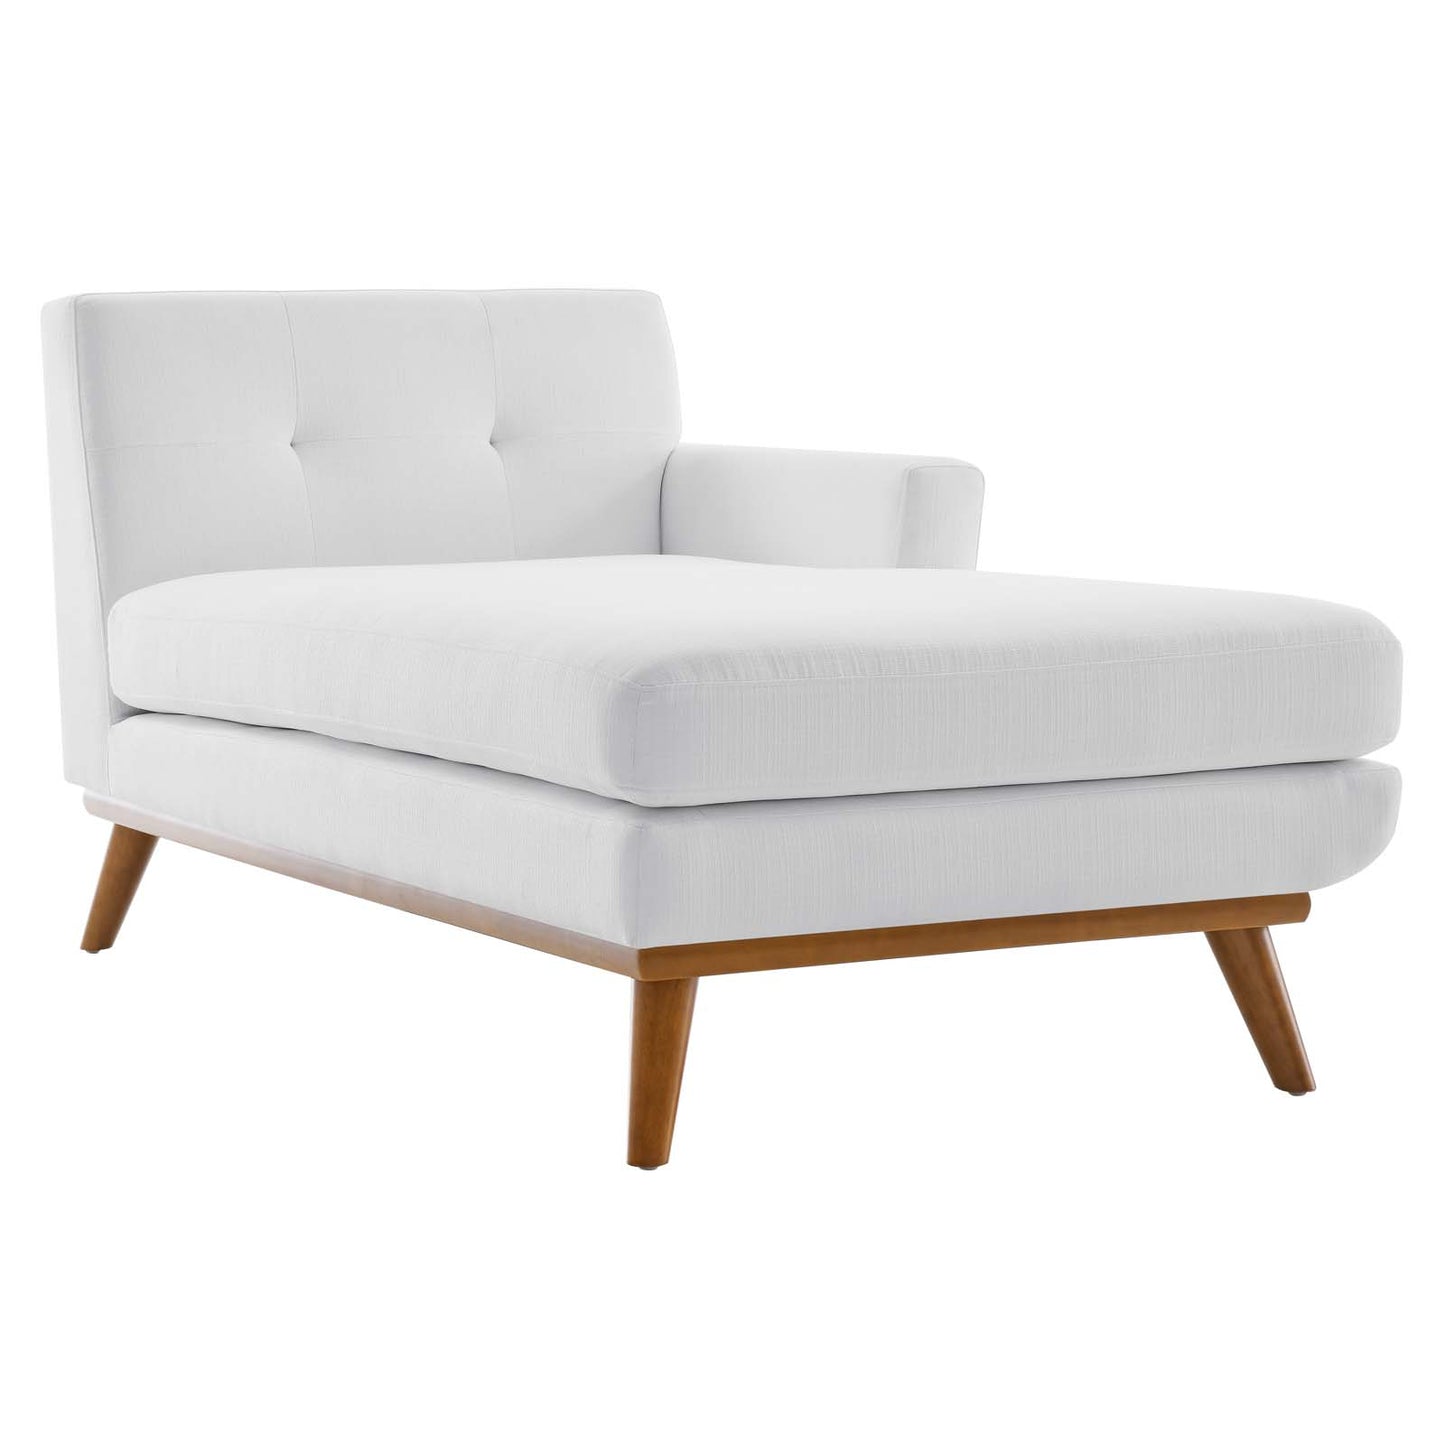 Engage Right-Facing Upholstered Fabric Sectional Sofa White EEI-2119-WHI-SET